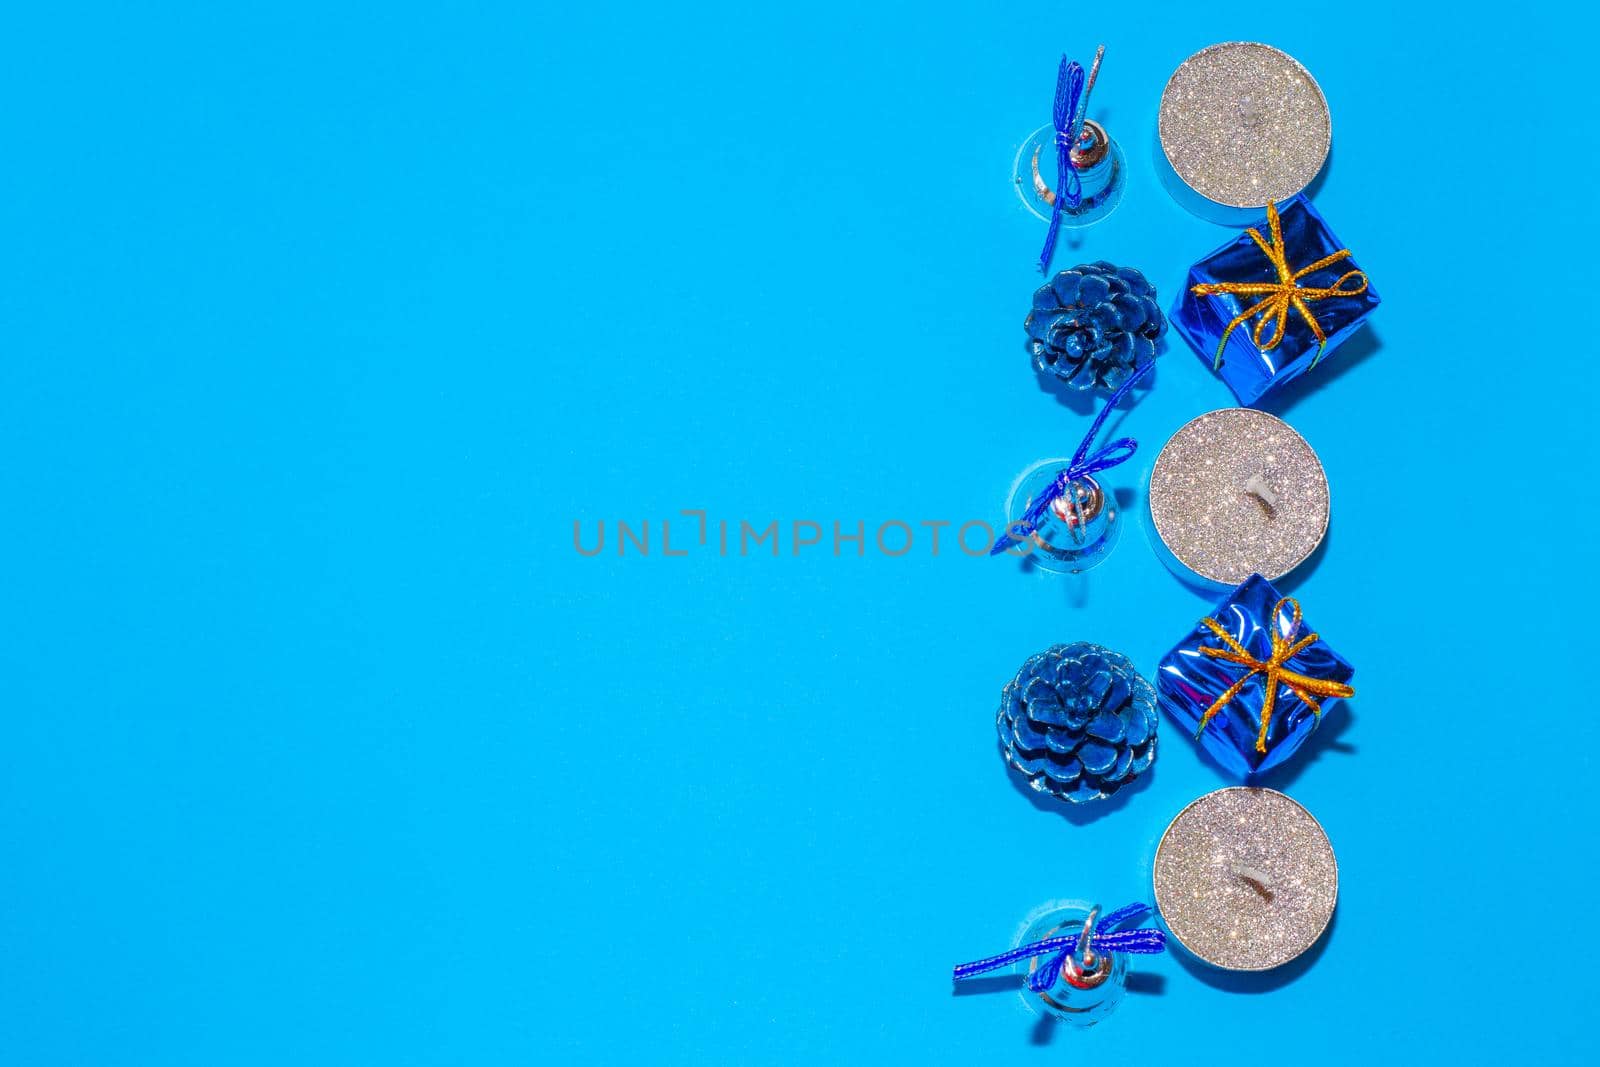 candles and christmas decorations on blue background, christmas festive background, flat layout, top view.